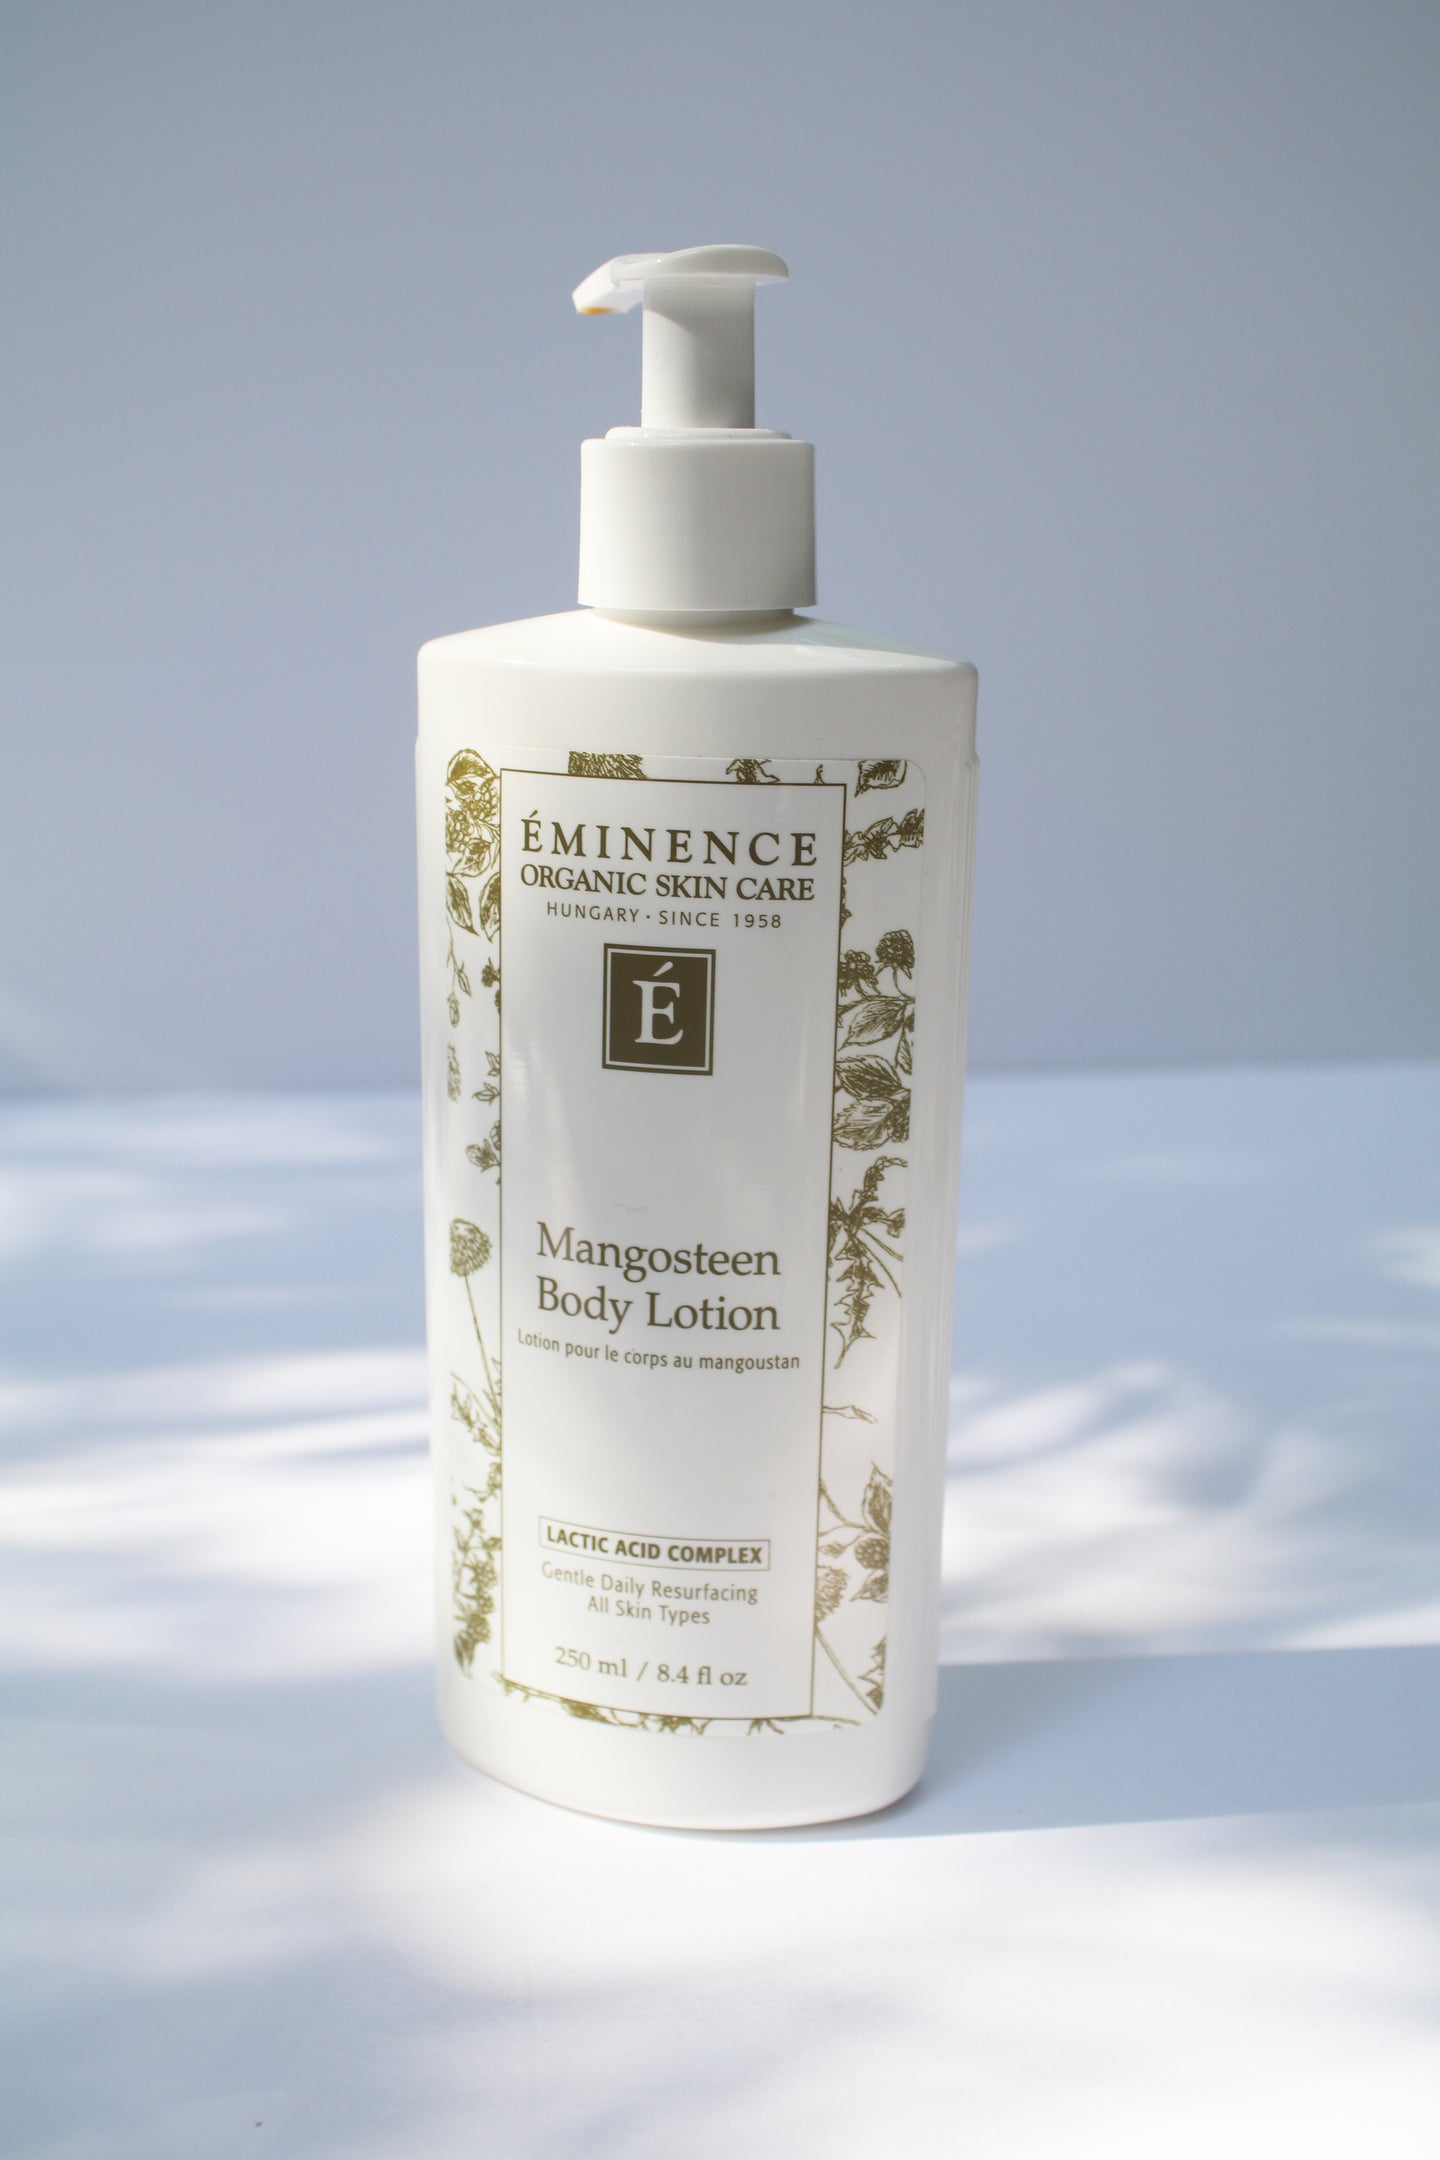 a bottle of mangosteen body lotion by Eminence